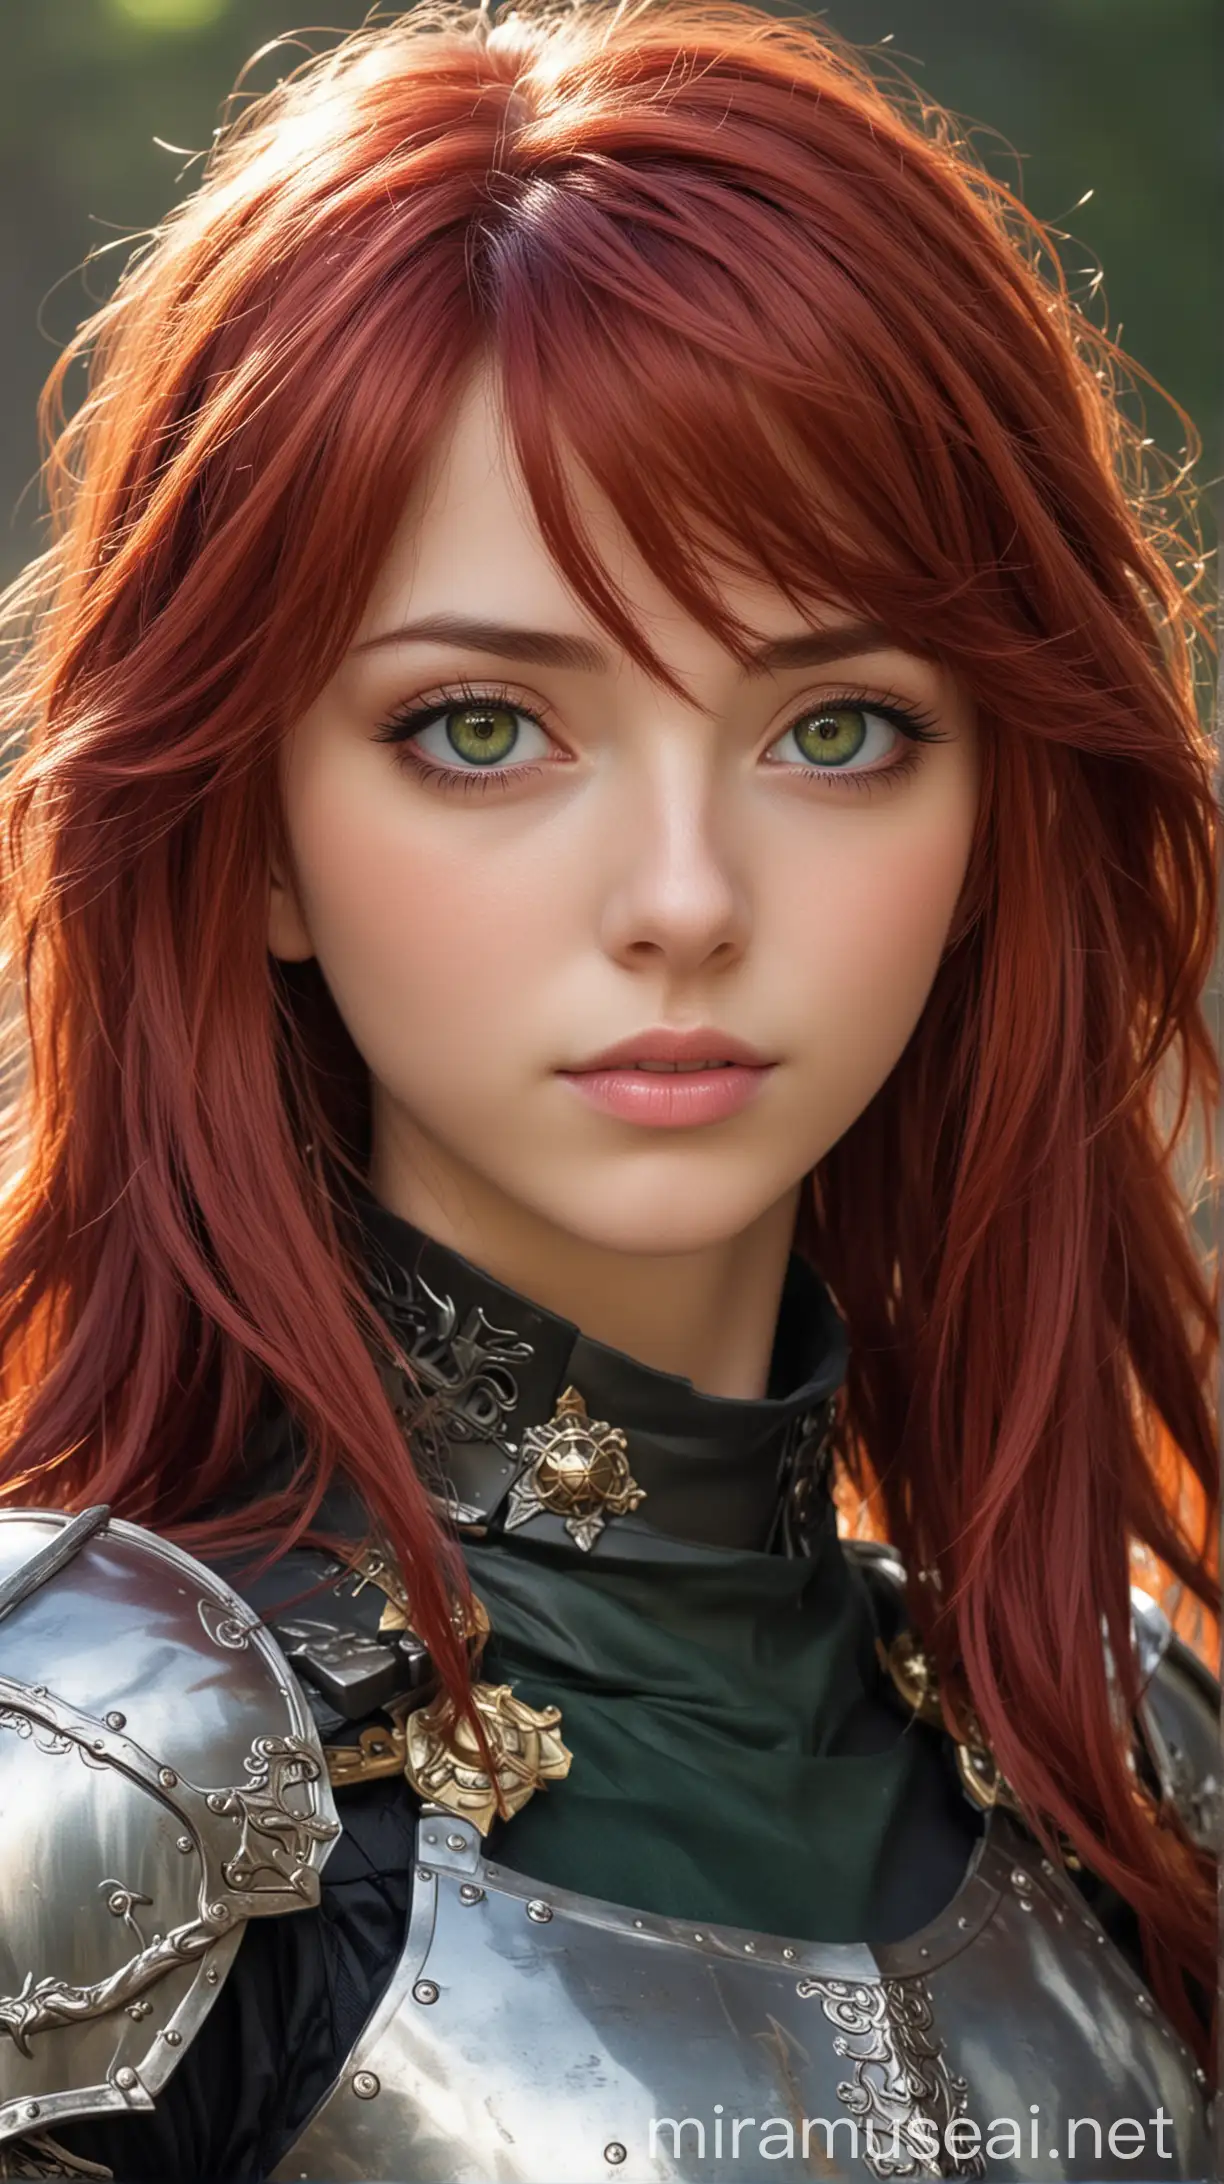 young anime girl, 23 years old, cherry red hair, long and wavy, green eyes, knight's armor attire, tranquil face.